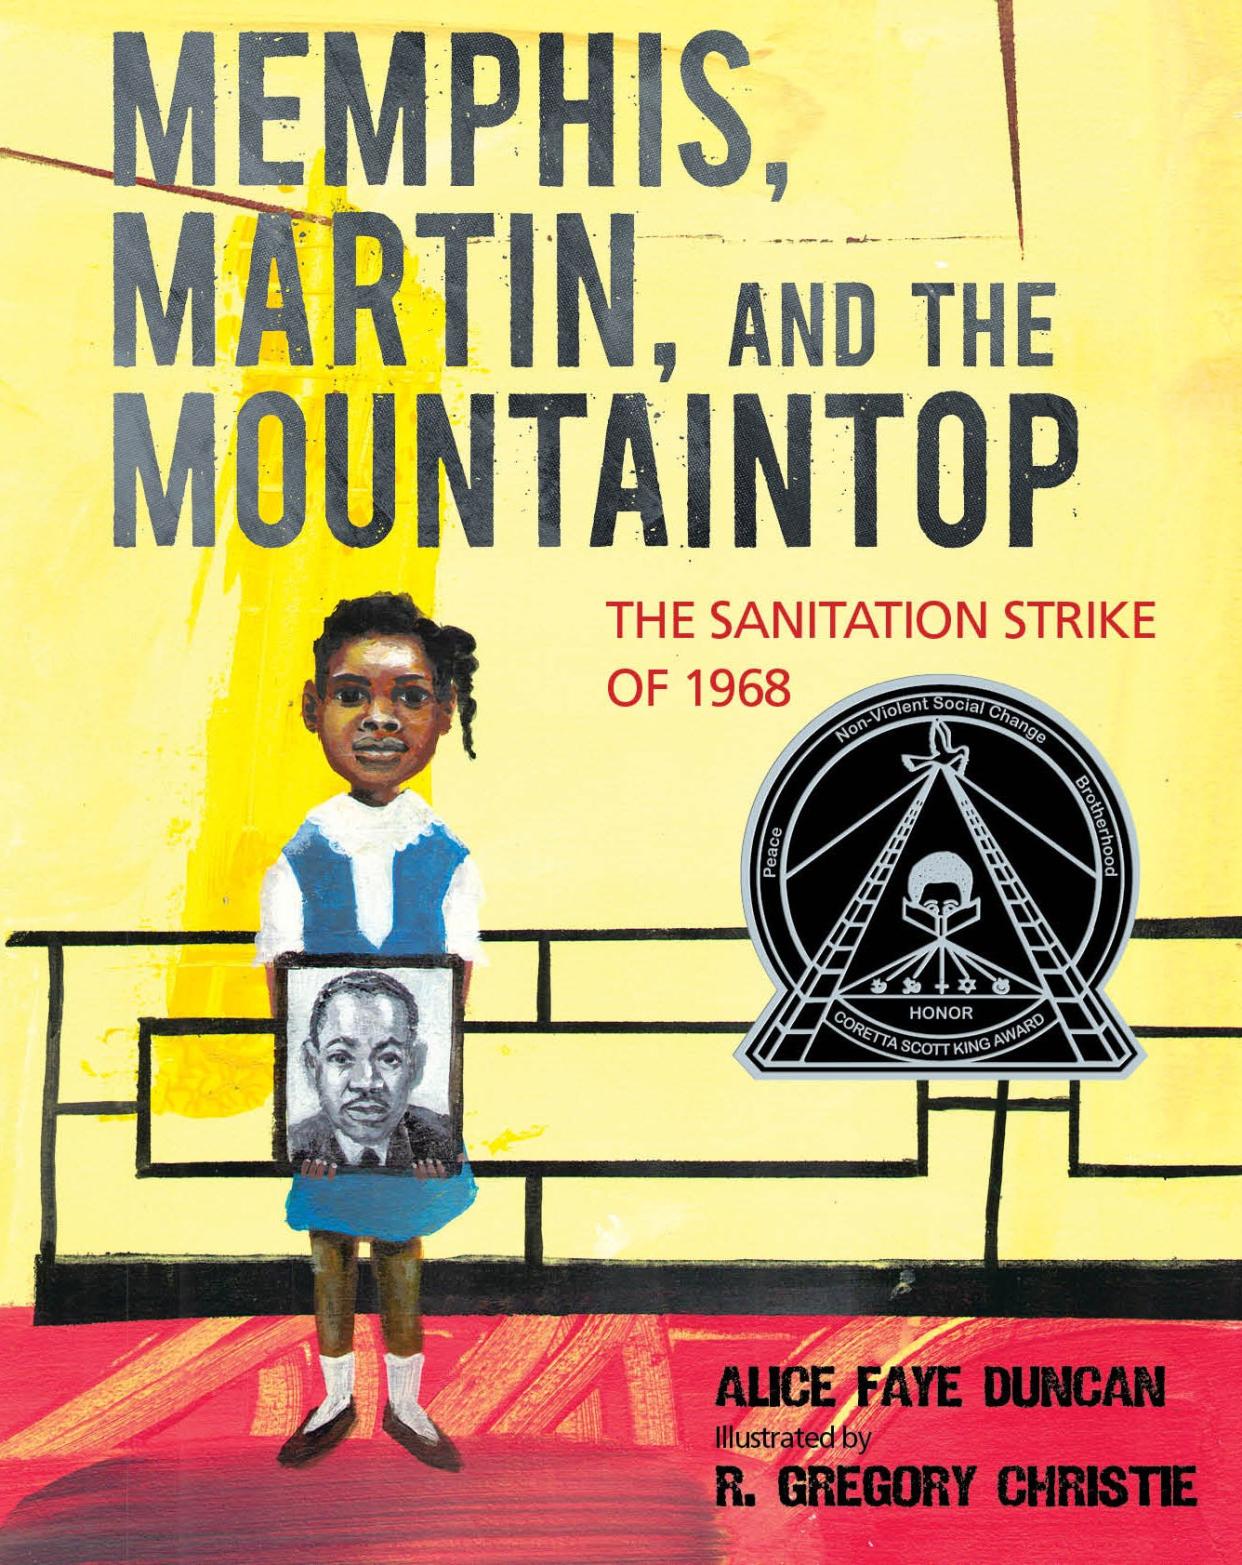 The cover of Alice Faye Duncan's "Memphis, Martin, and the Mountaintop" — one of 47 books that Duval County Public Schools returned to the distributor.